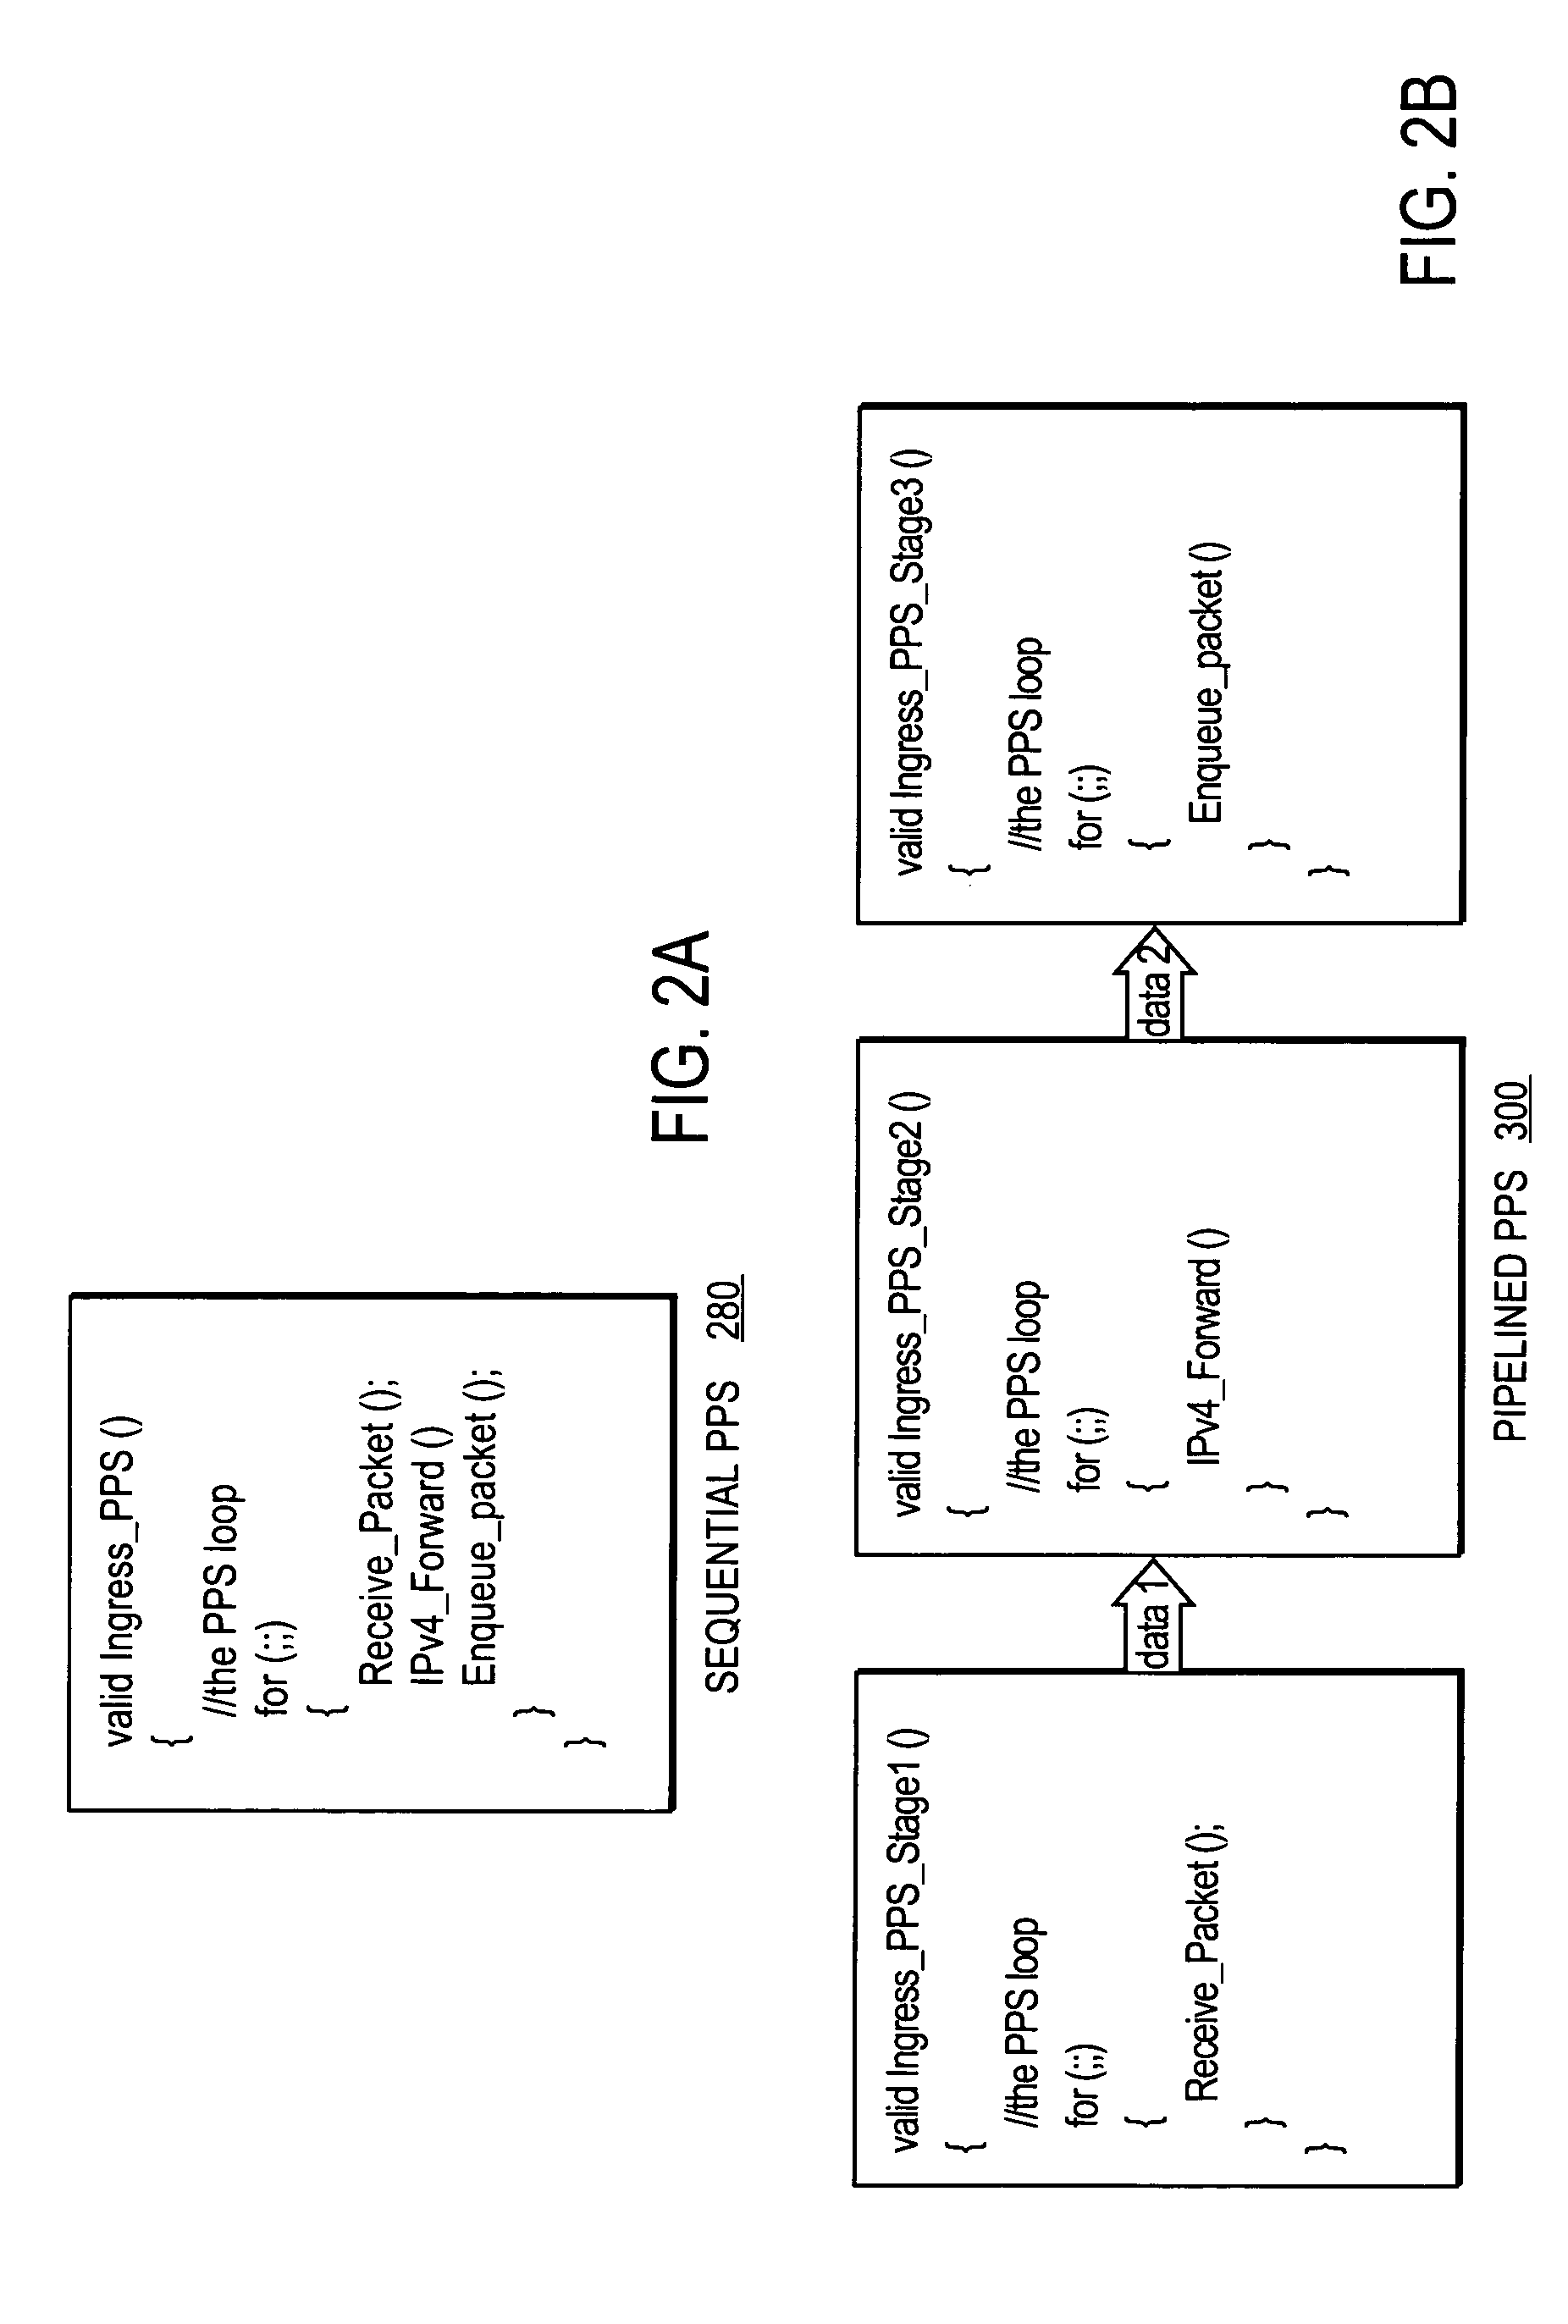 Apparatus and method for automatically parallelizing network applications through pipelining transformation